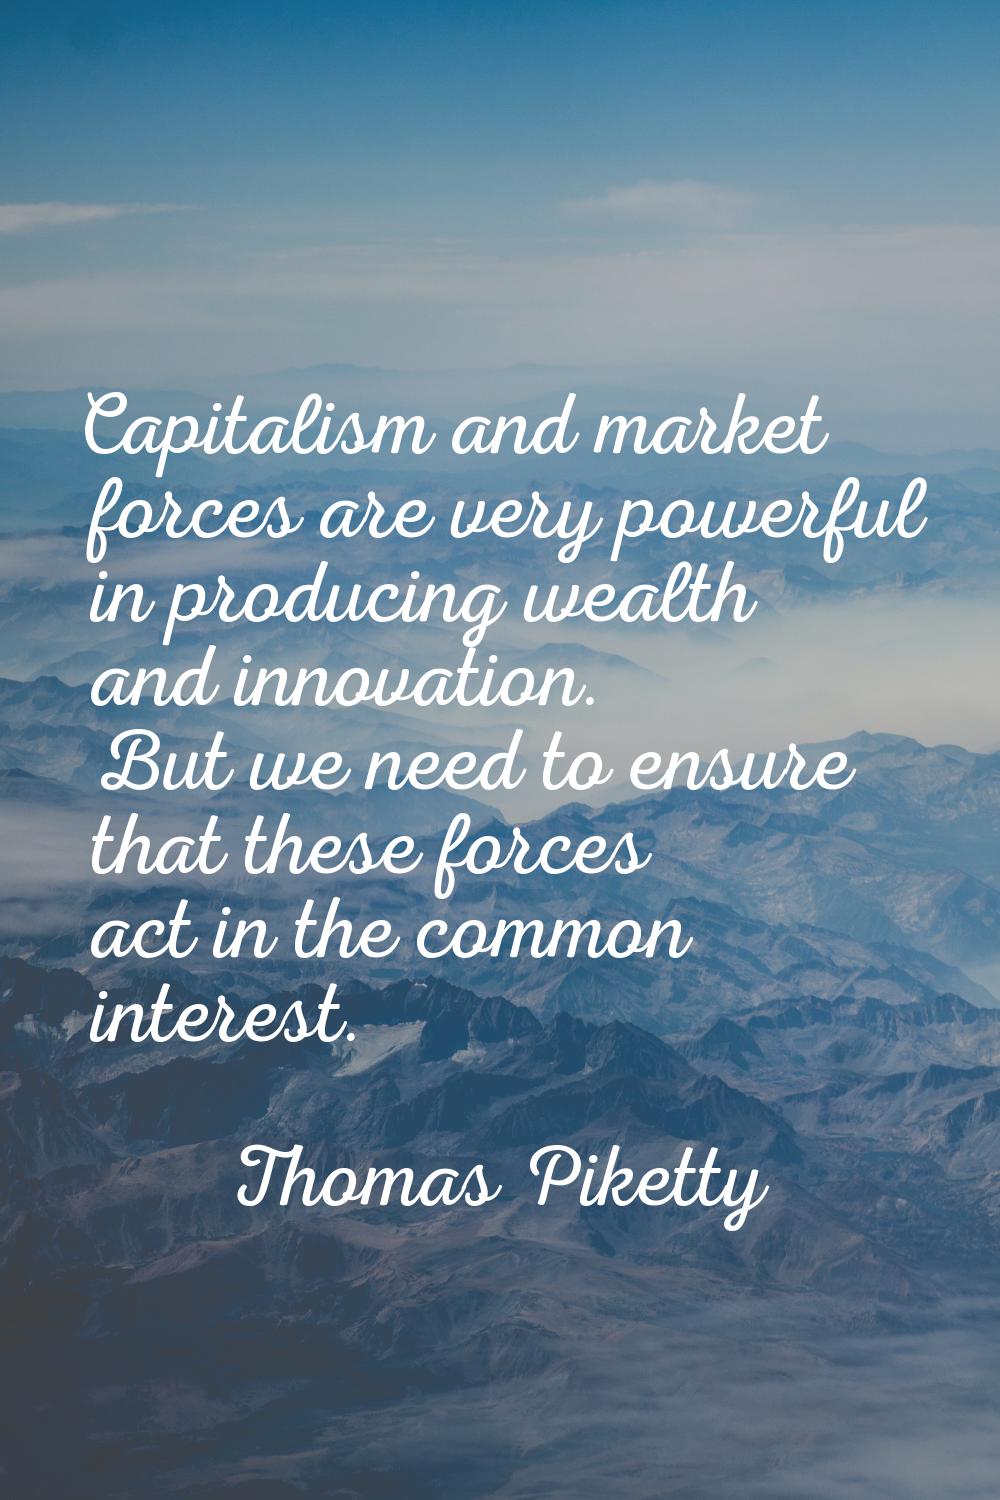 Capitalism and market forces are very powerful in producing wealth and innovation. But we need to e